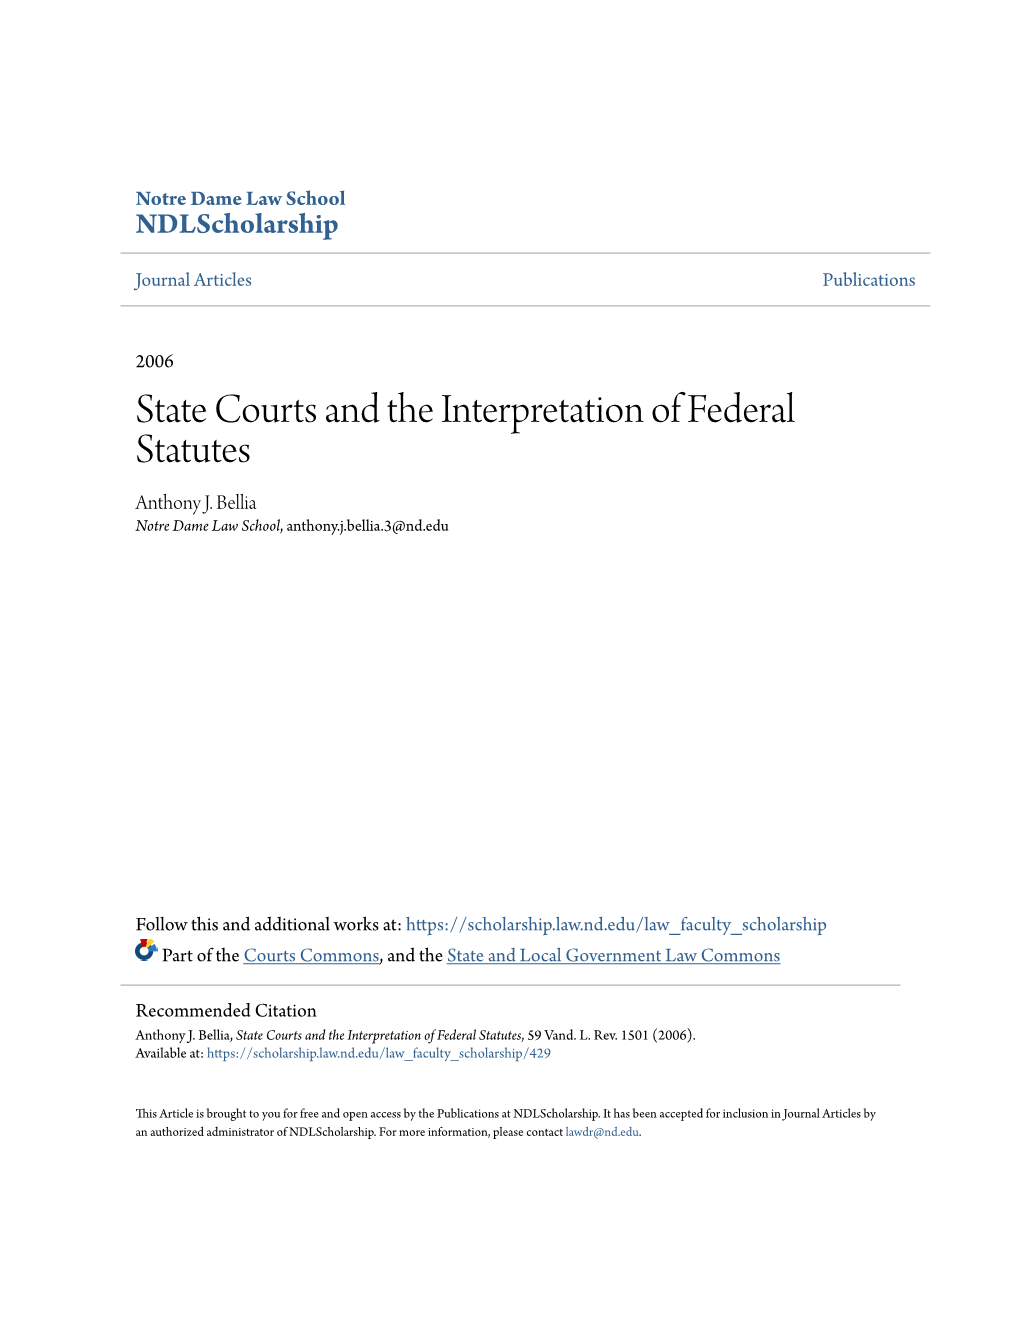 State Courts and the Interpretation of Federal Statutes Anthony J